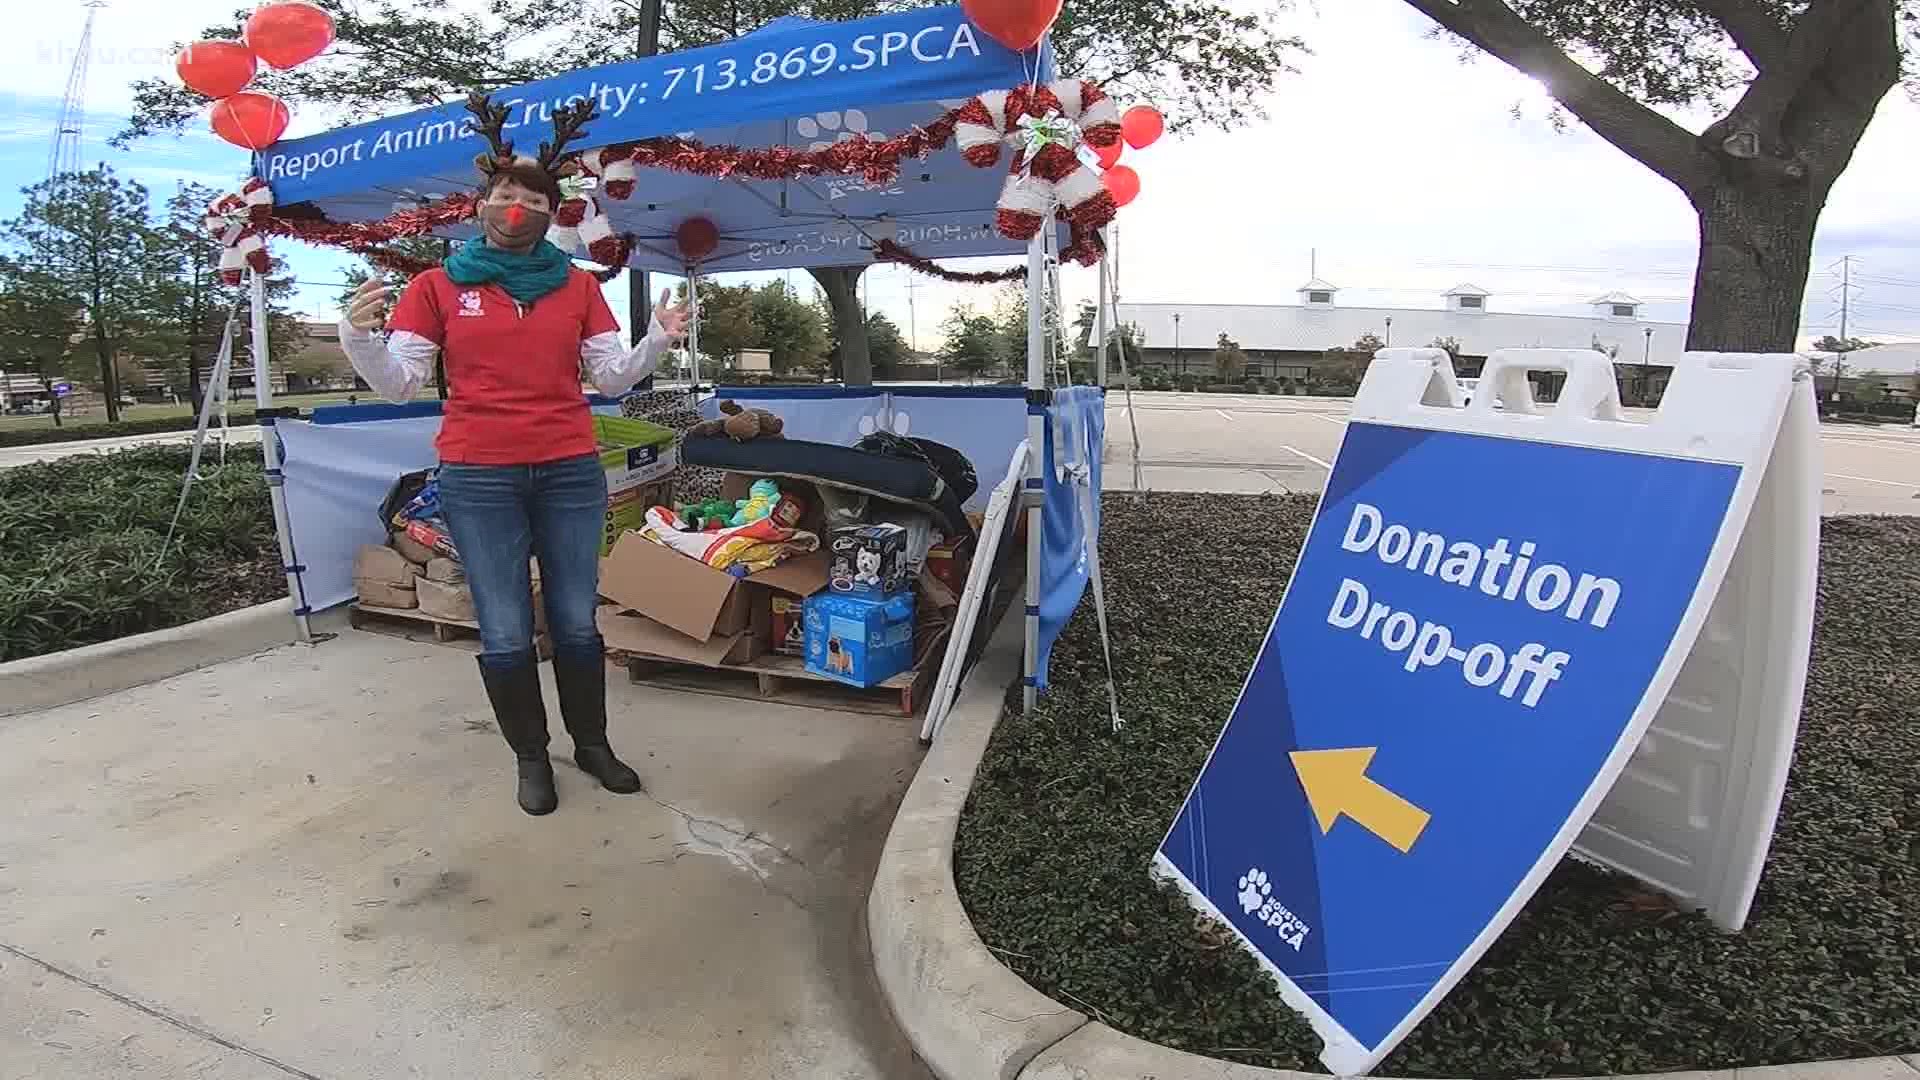 The Houston SPCA is stepping up this holiday season by helping homebound seniors and their pets.